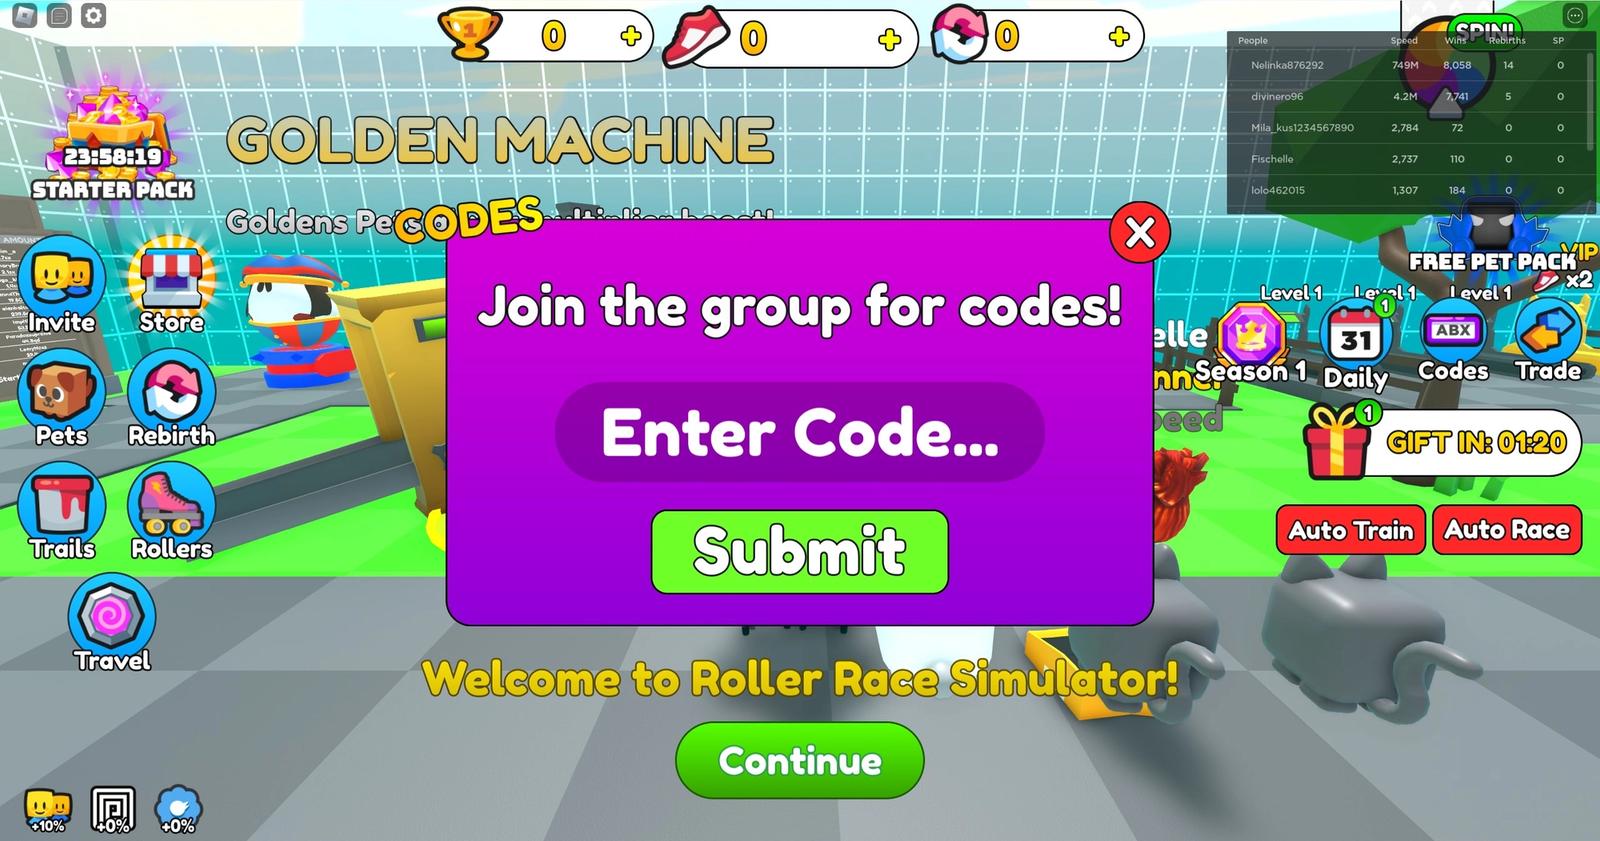 How to redeem Roller Race Simulator codes